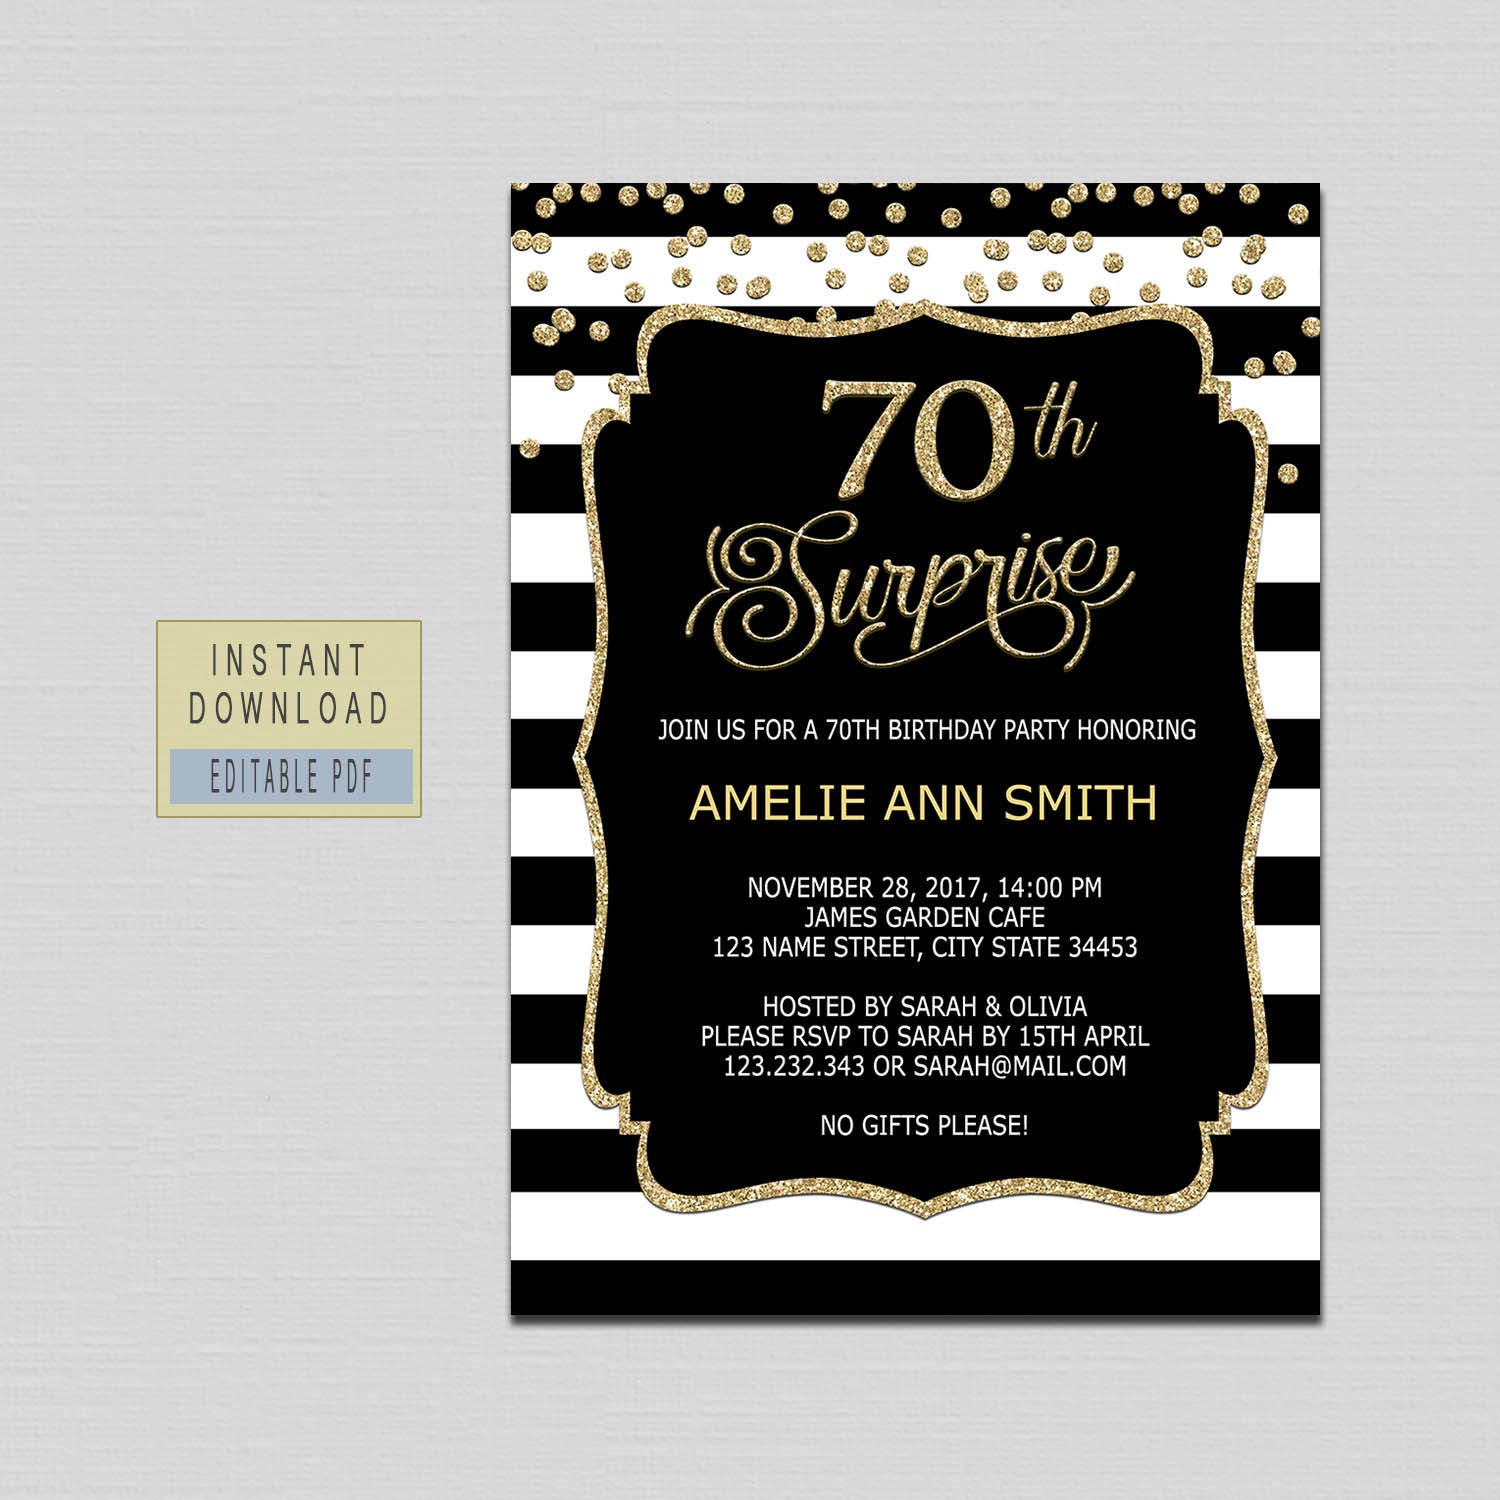 70th surprise birthday invitation instant download 70th | Etsy